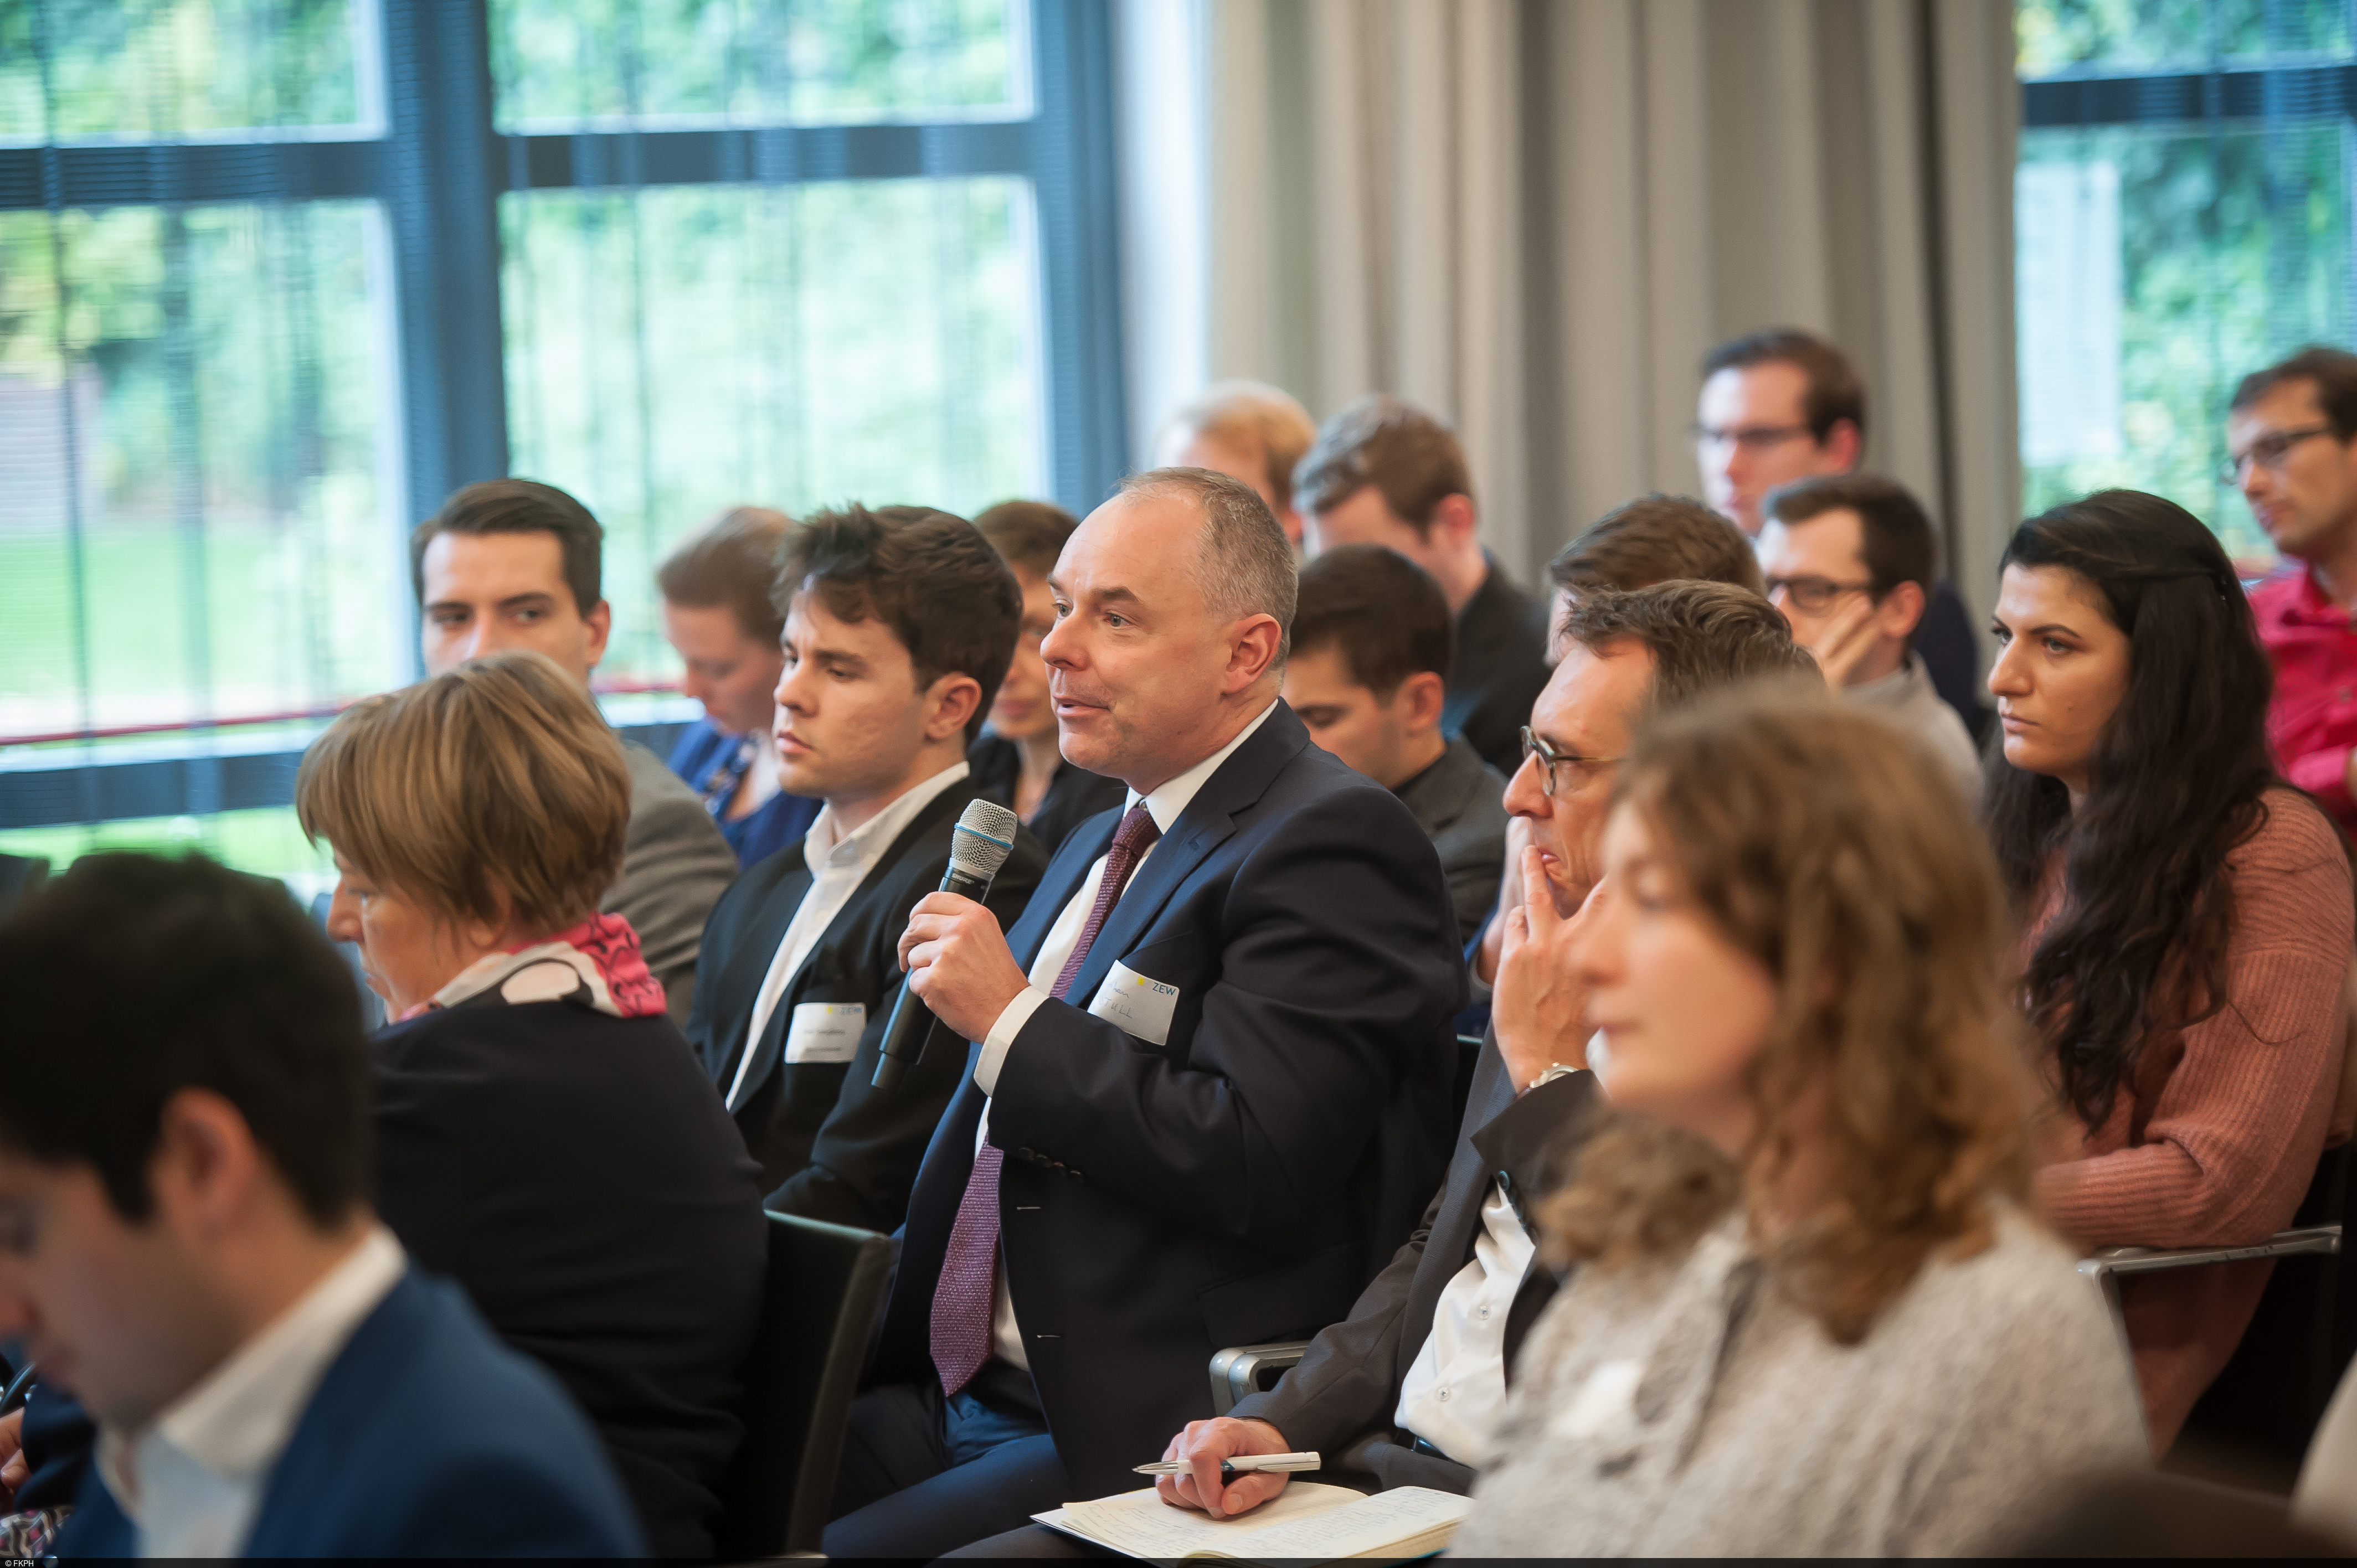 The audience at the ZEW Lunch Debate on digitalization at the workplace